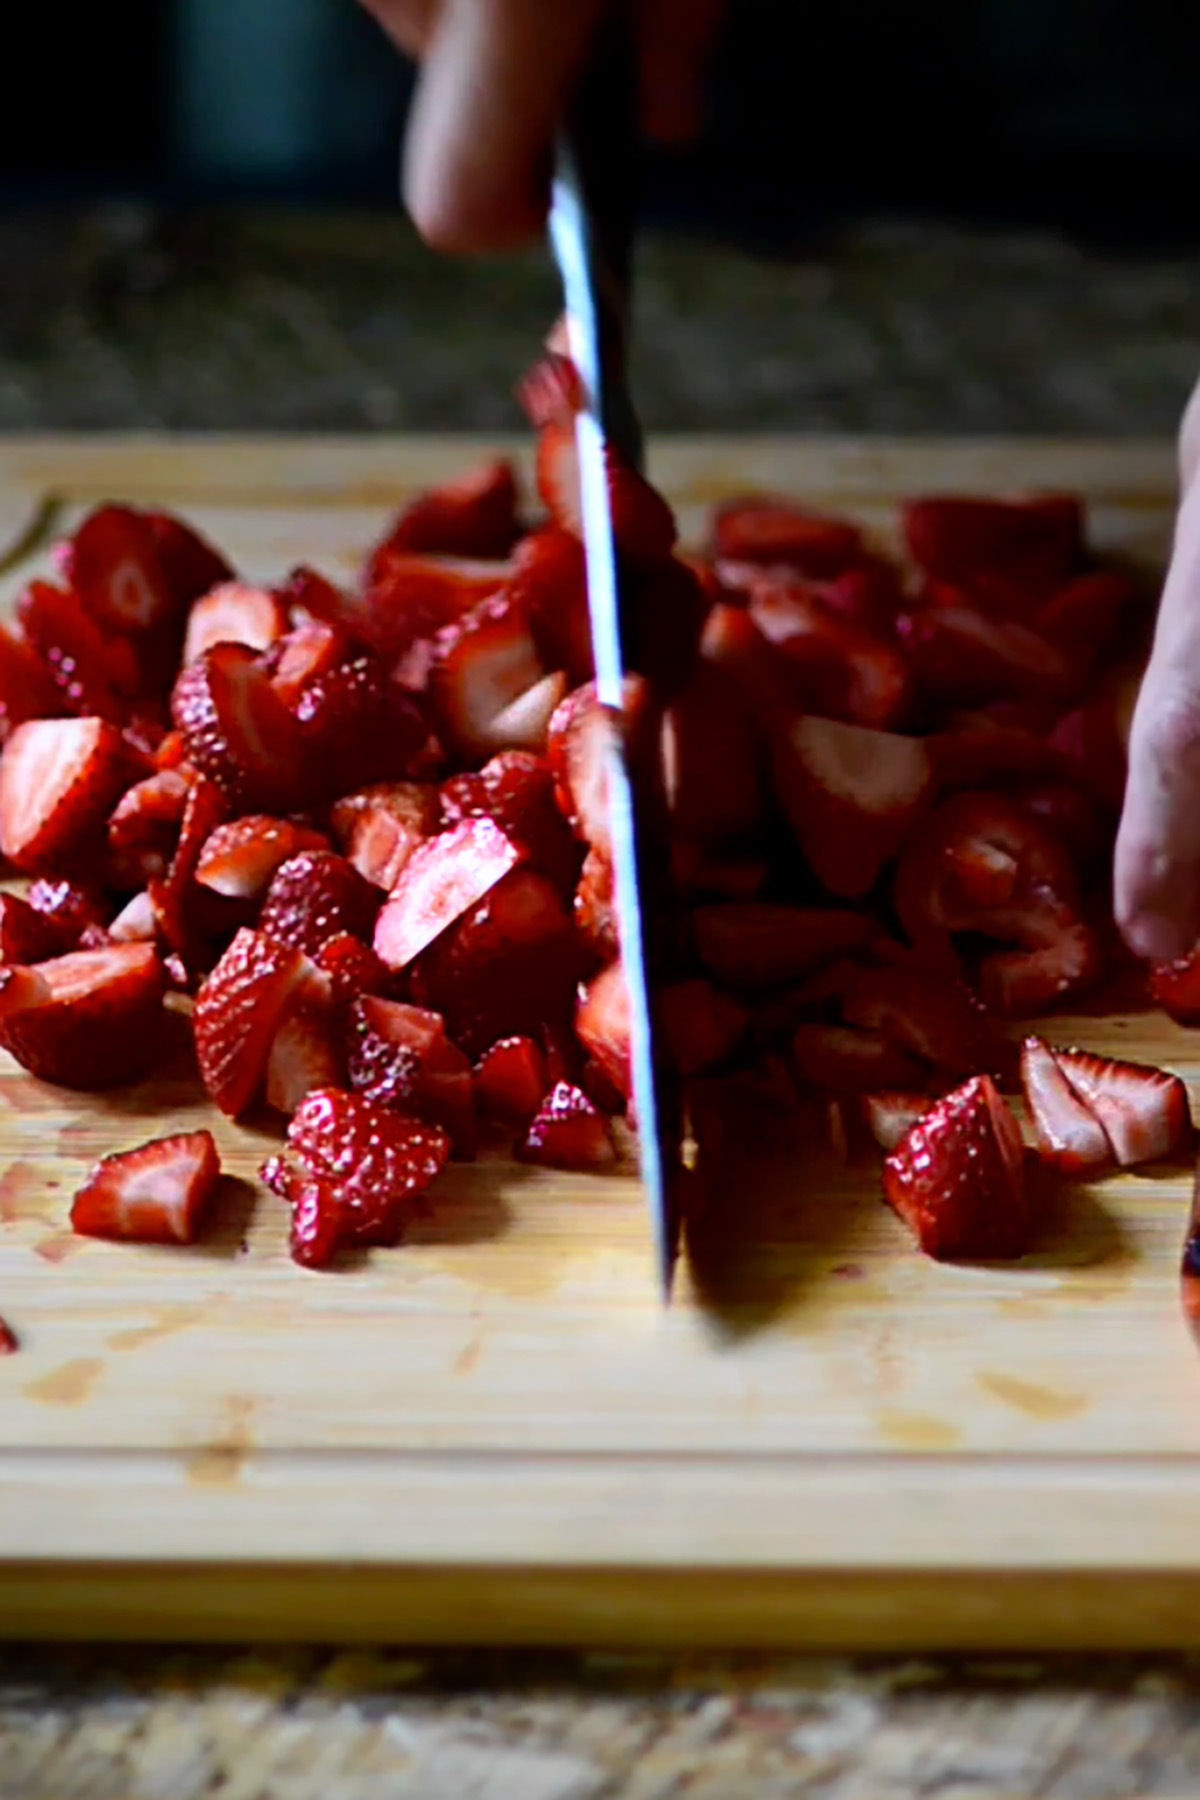 Strawberries being sliced on a wood cutting board.